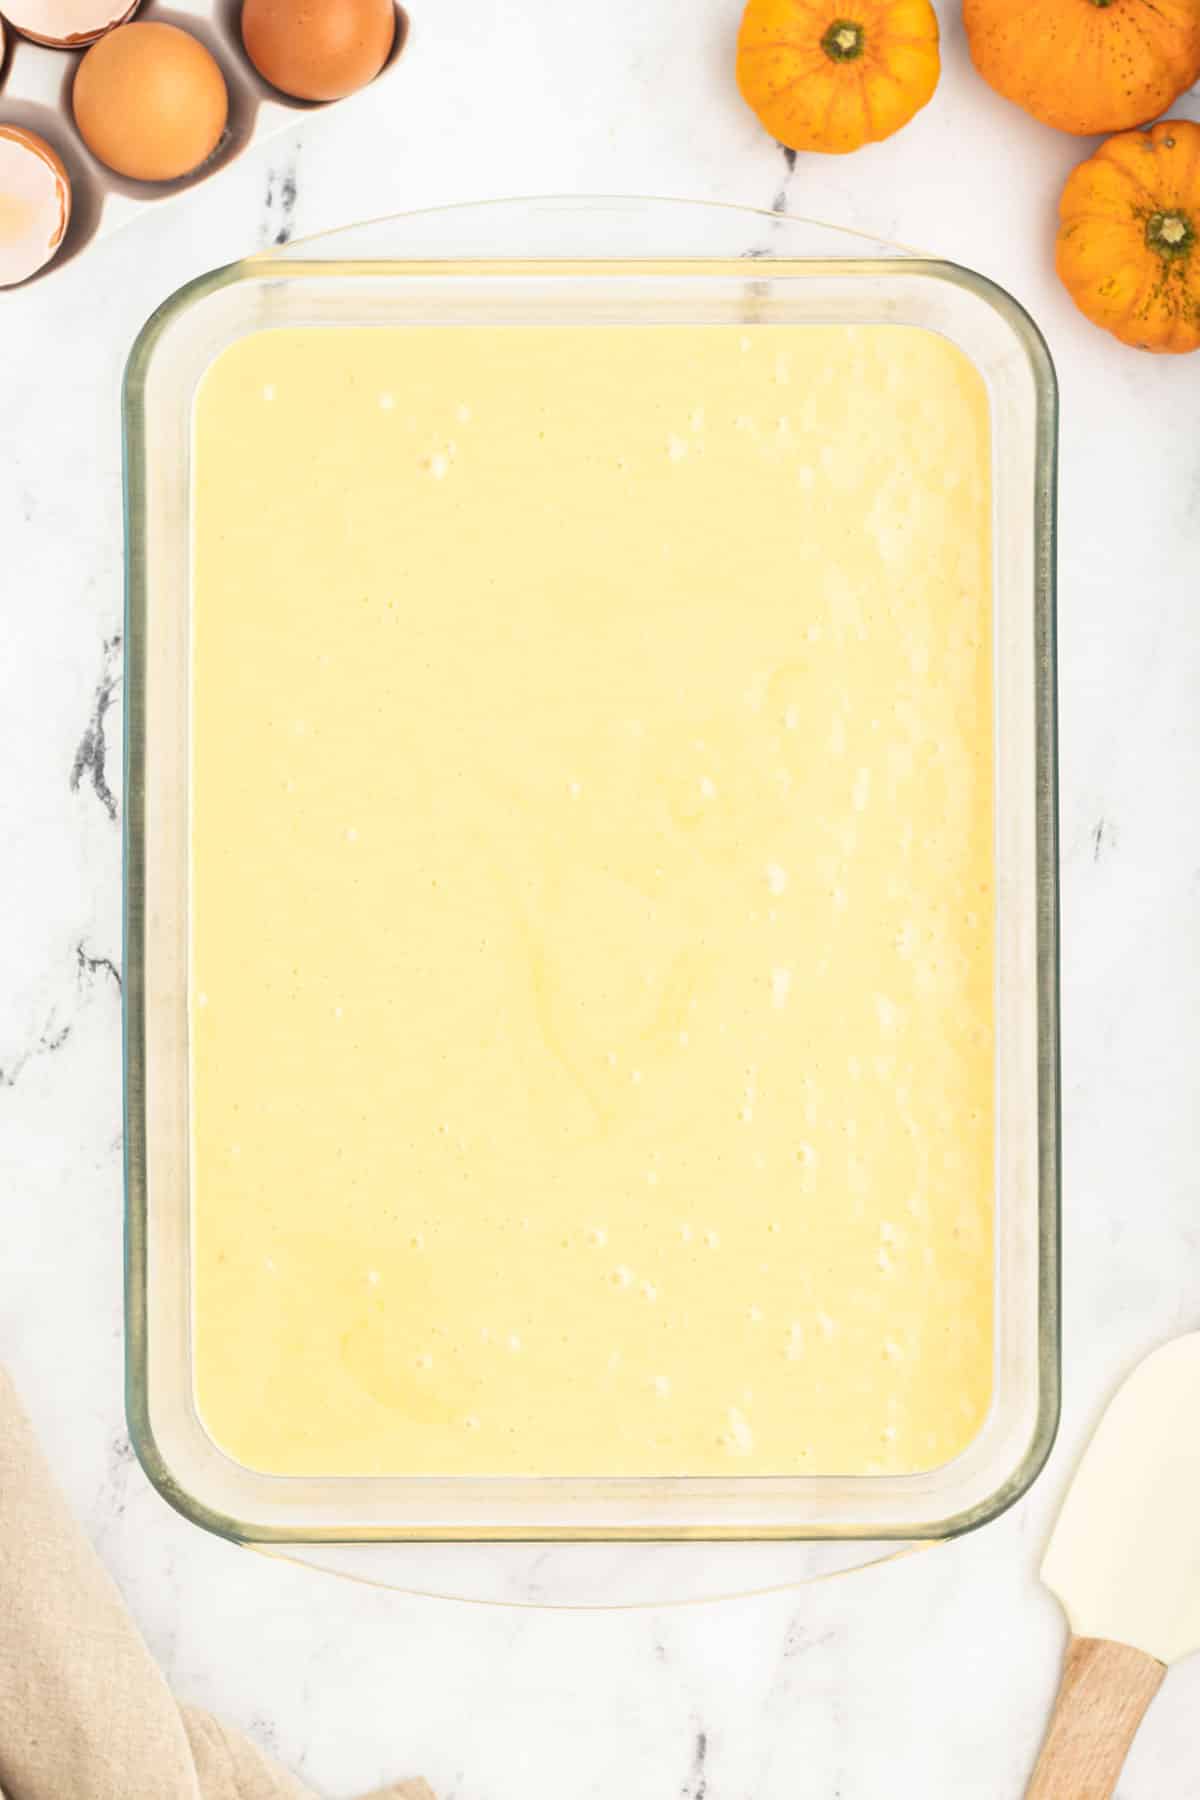 A baking dish with yellow cake batter in it